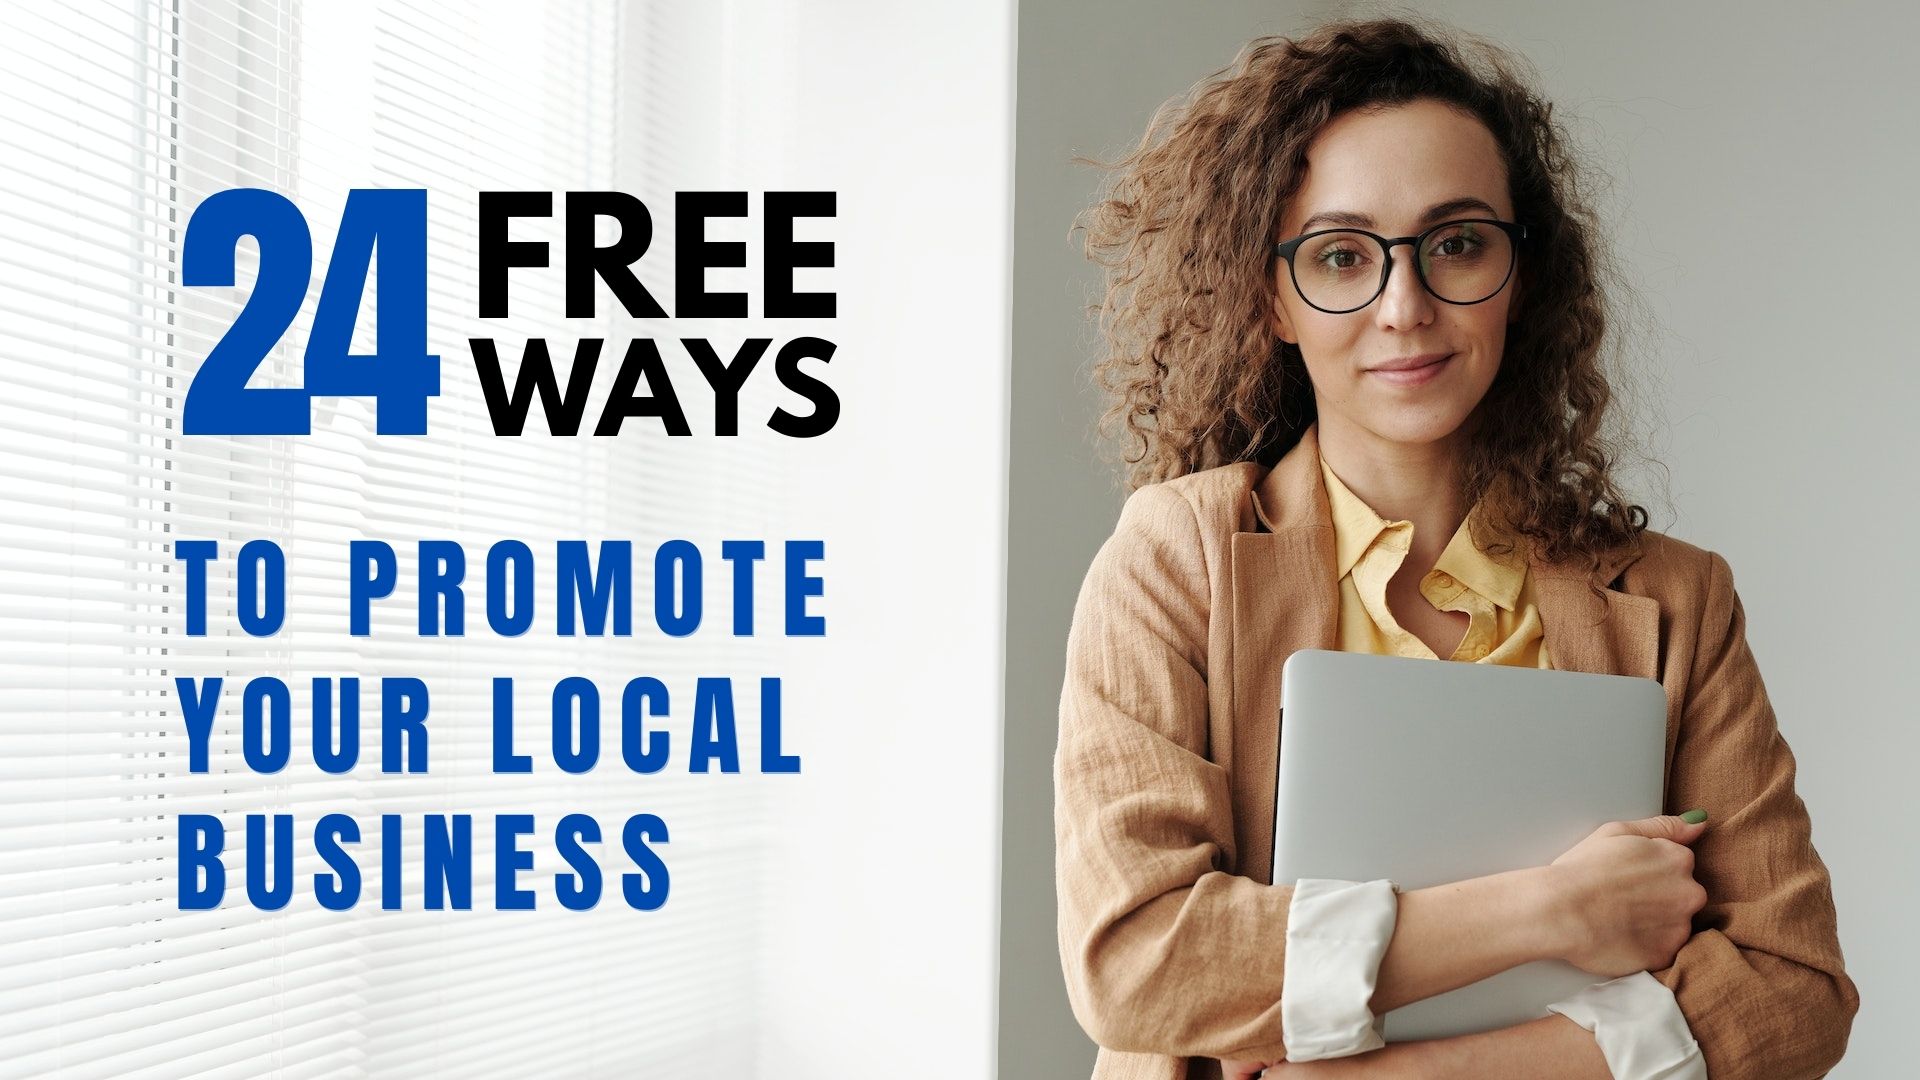 24 Ways to Promote Your Small Business Locally for Free